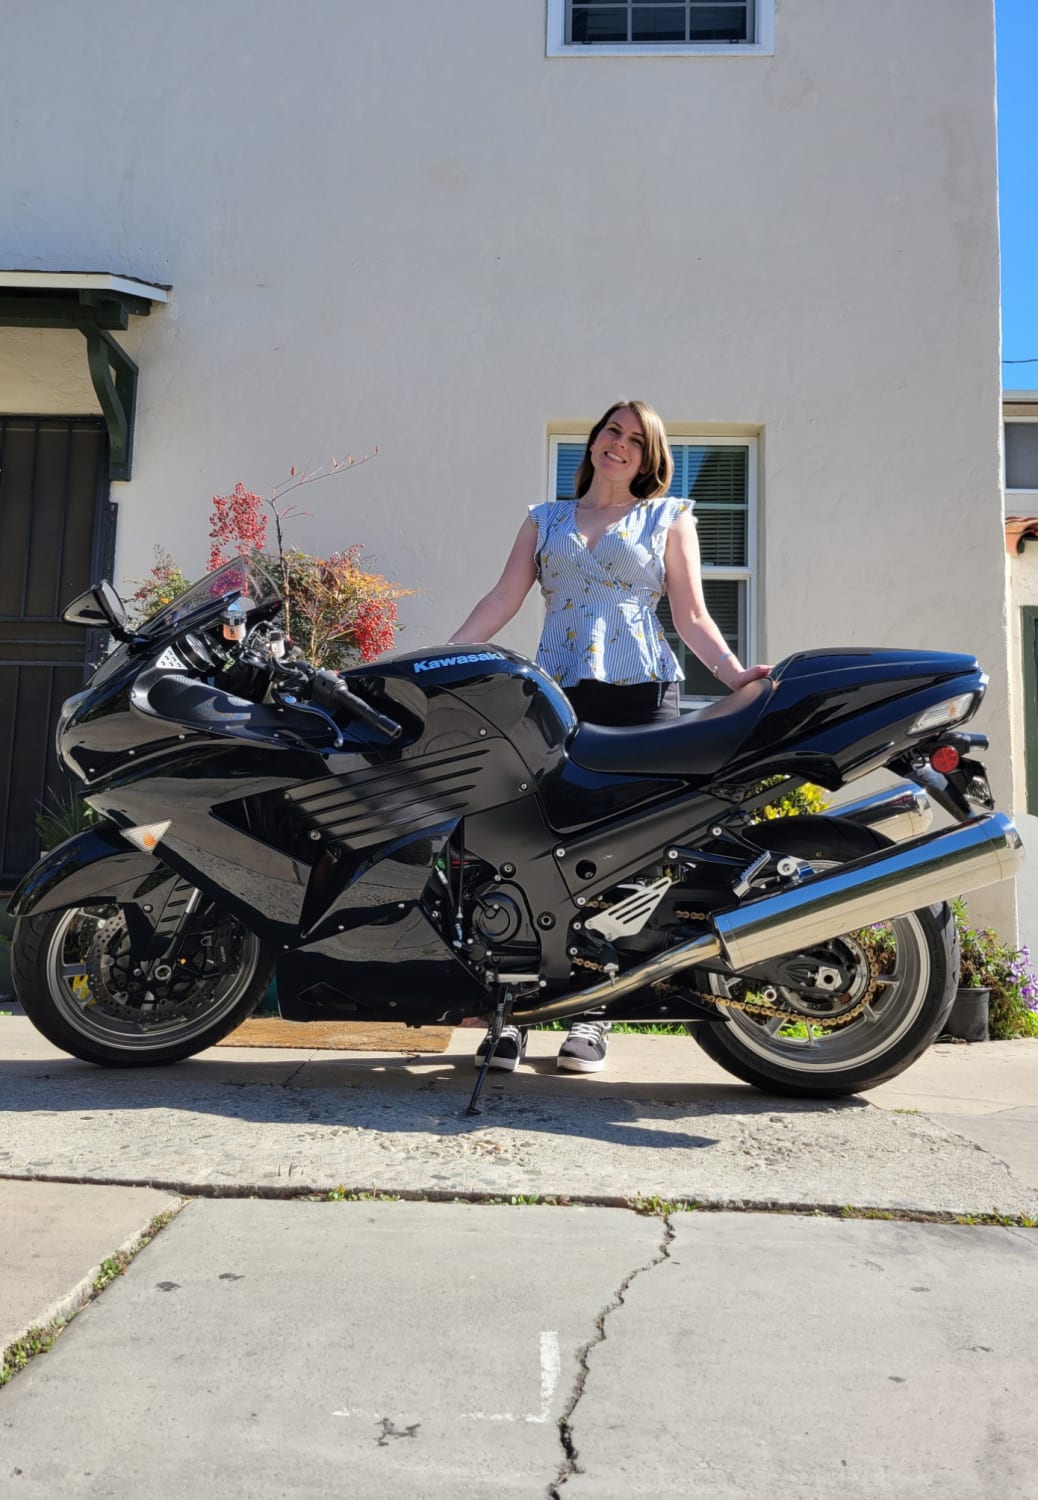 I'M FINALLY BACK ON TWO WHEELS! In 2017 I was t-boned at low speed on my GSXR 750. Life just got in the way of replacing my beloved gixxer until a family friend brought an offer to me that was almost too good to be true. Now I'm the proud owner of this immaculately kept 07 ZX14